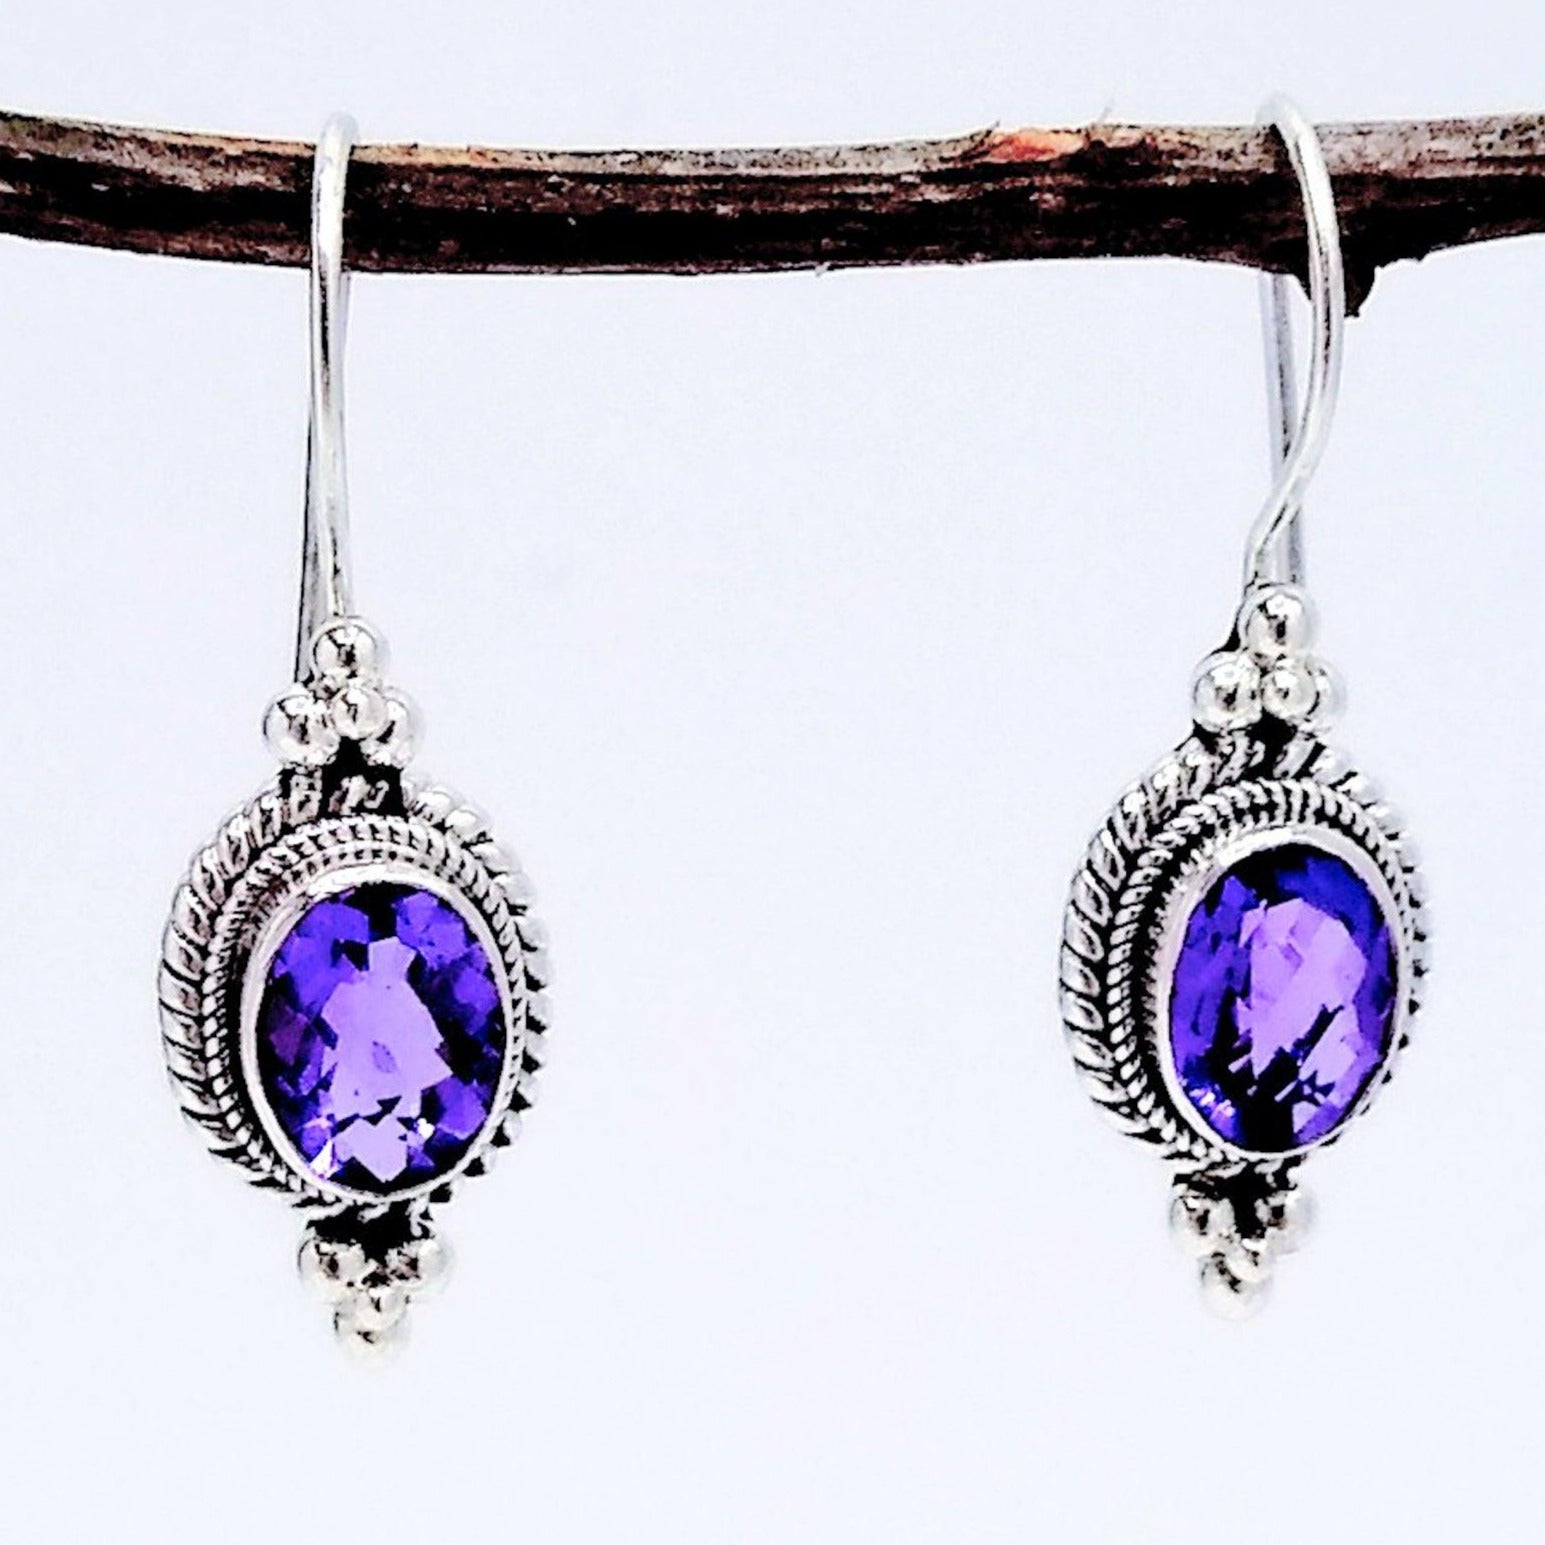 925 Sterling Silver and Amethyst dangle earrings - oval in shape with a double braided settings, and adorned with three stacks spheres both ontop and bottom of the setting, earwires are fixed to earring with a clasp design. February birth stone.